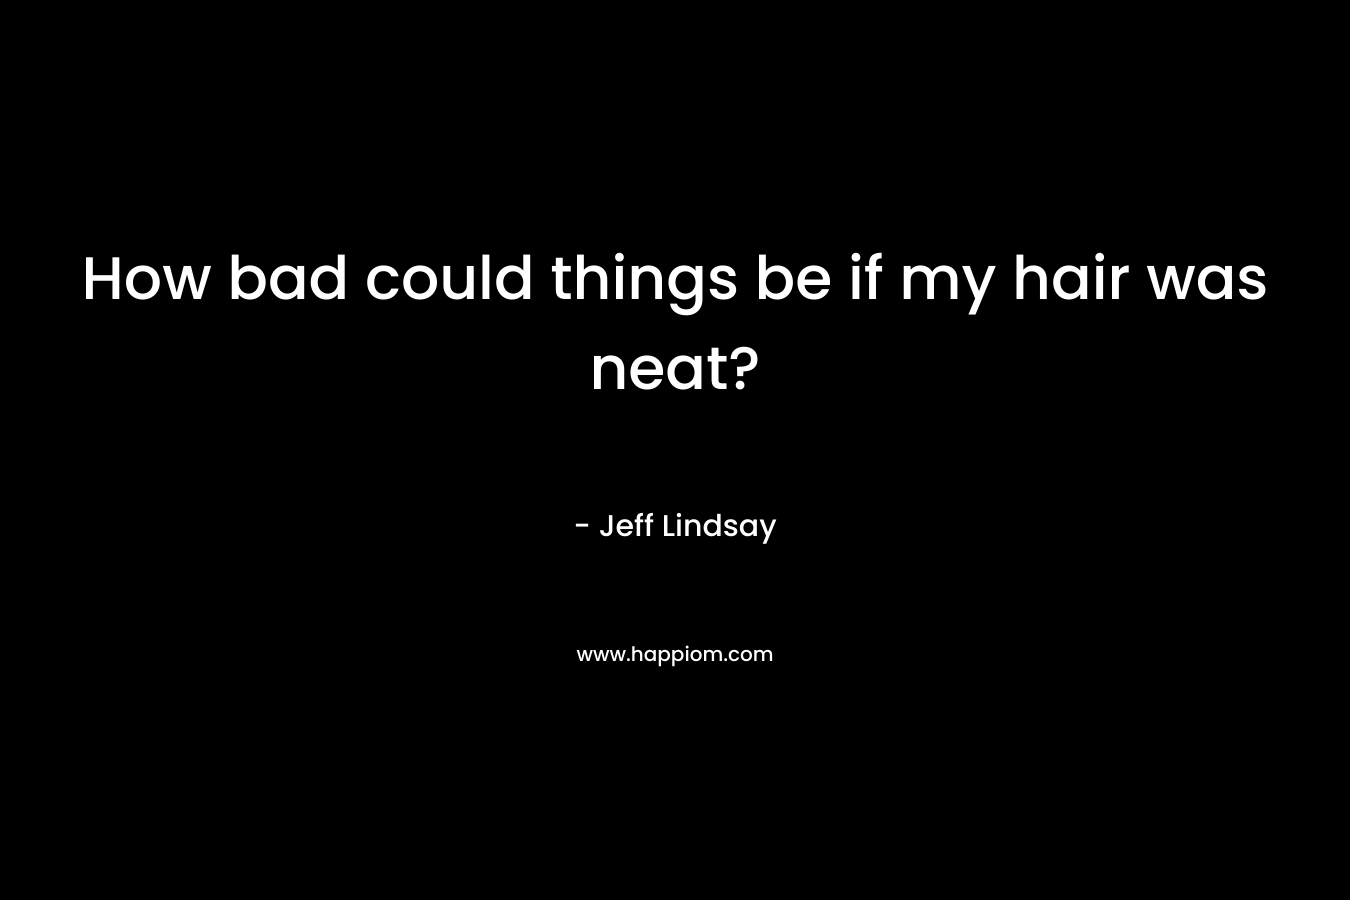 How bad could things be if my hair was neat?